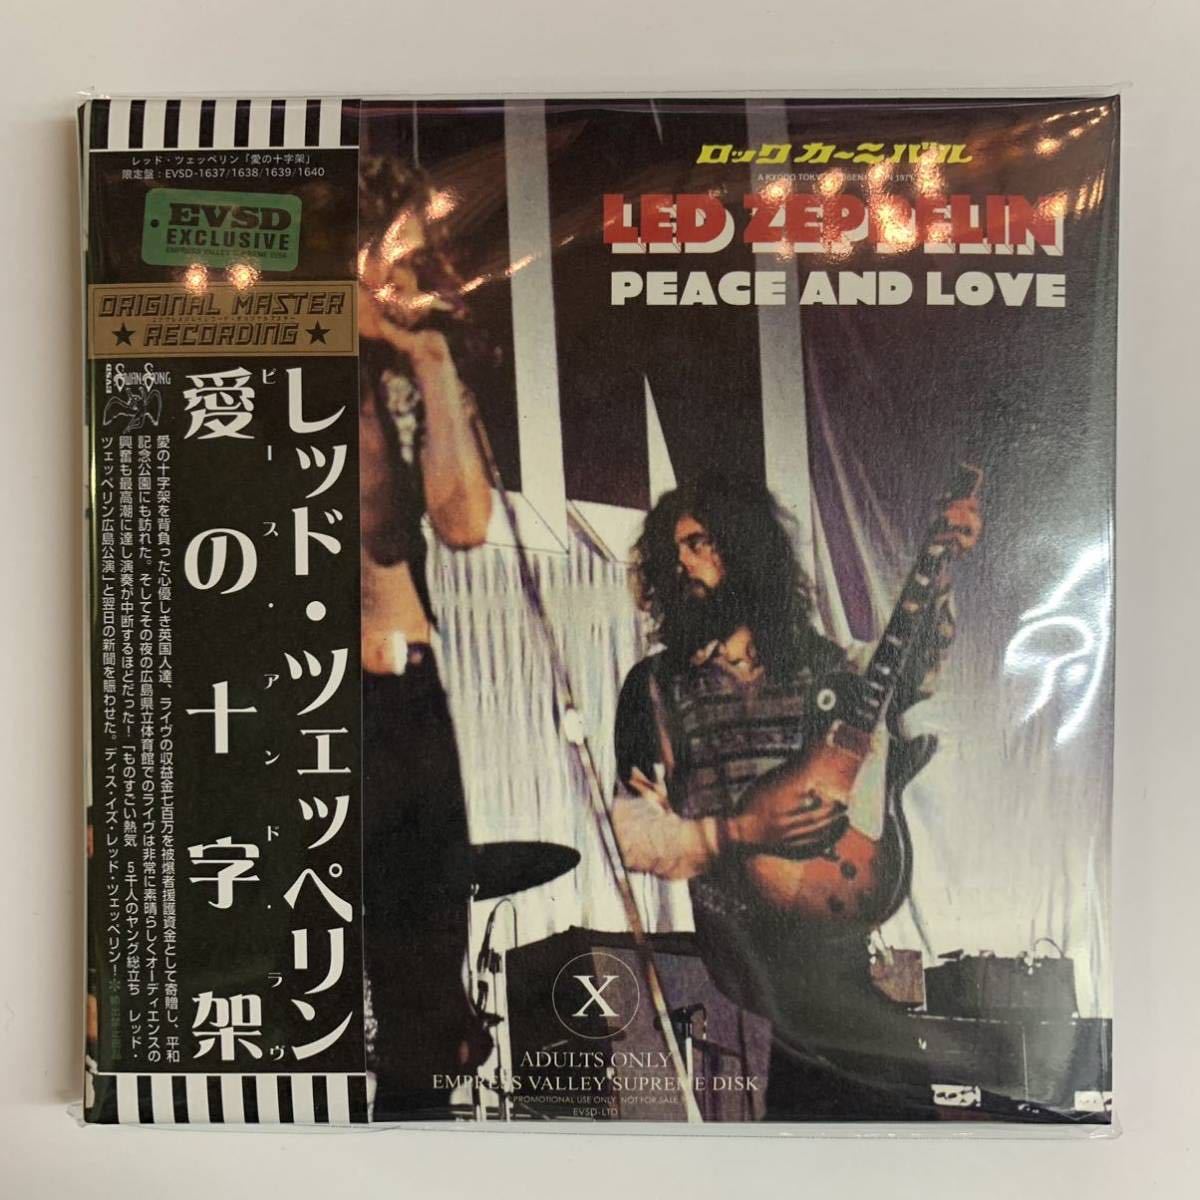 LED ZEPPELIN : PEACE AND LOVE「愛の十字架」6CD+DVD BOX 1971 広島公演 Empress Valley Supreme Disk 限定100セット番号入り！お早めに！